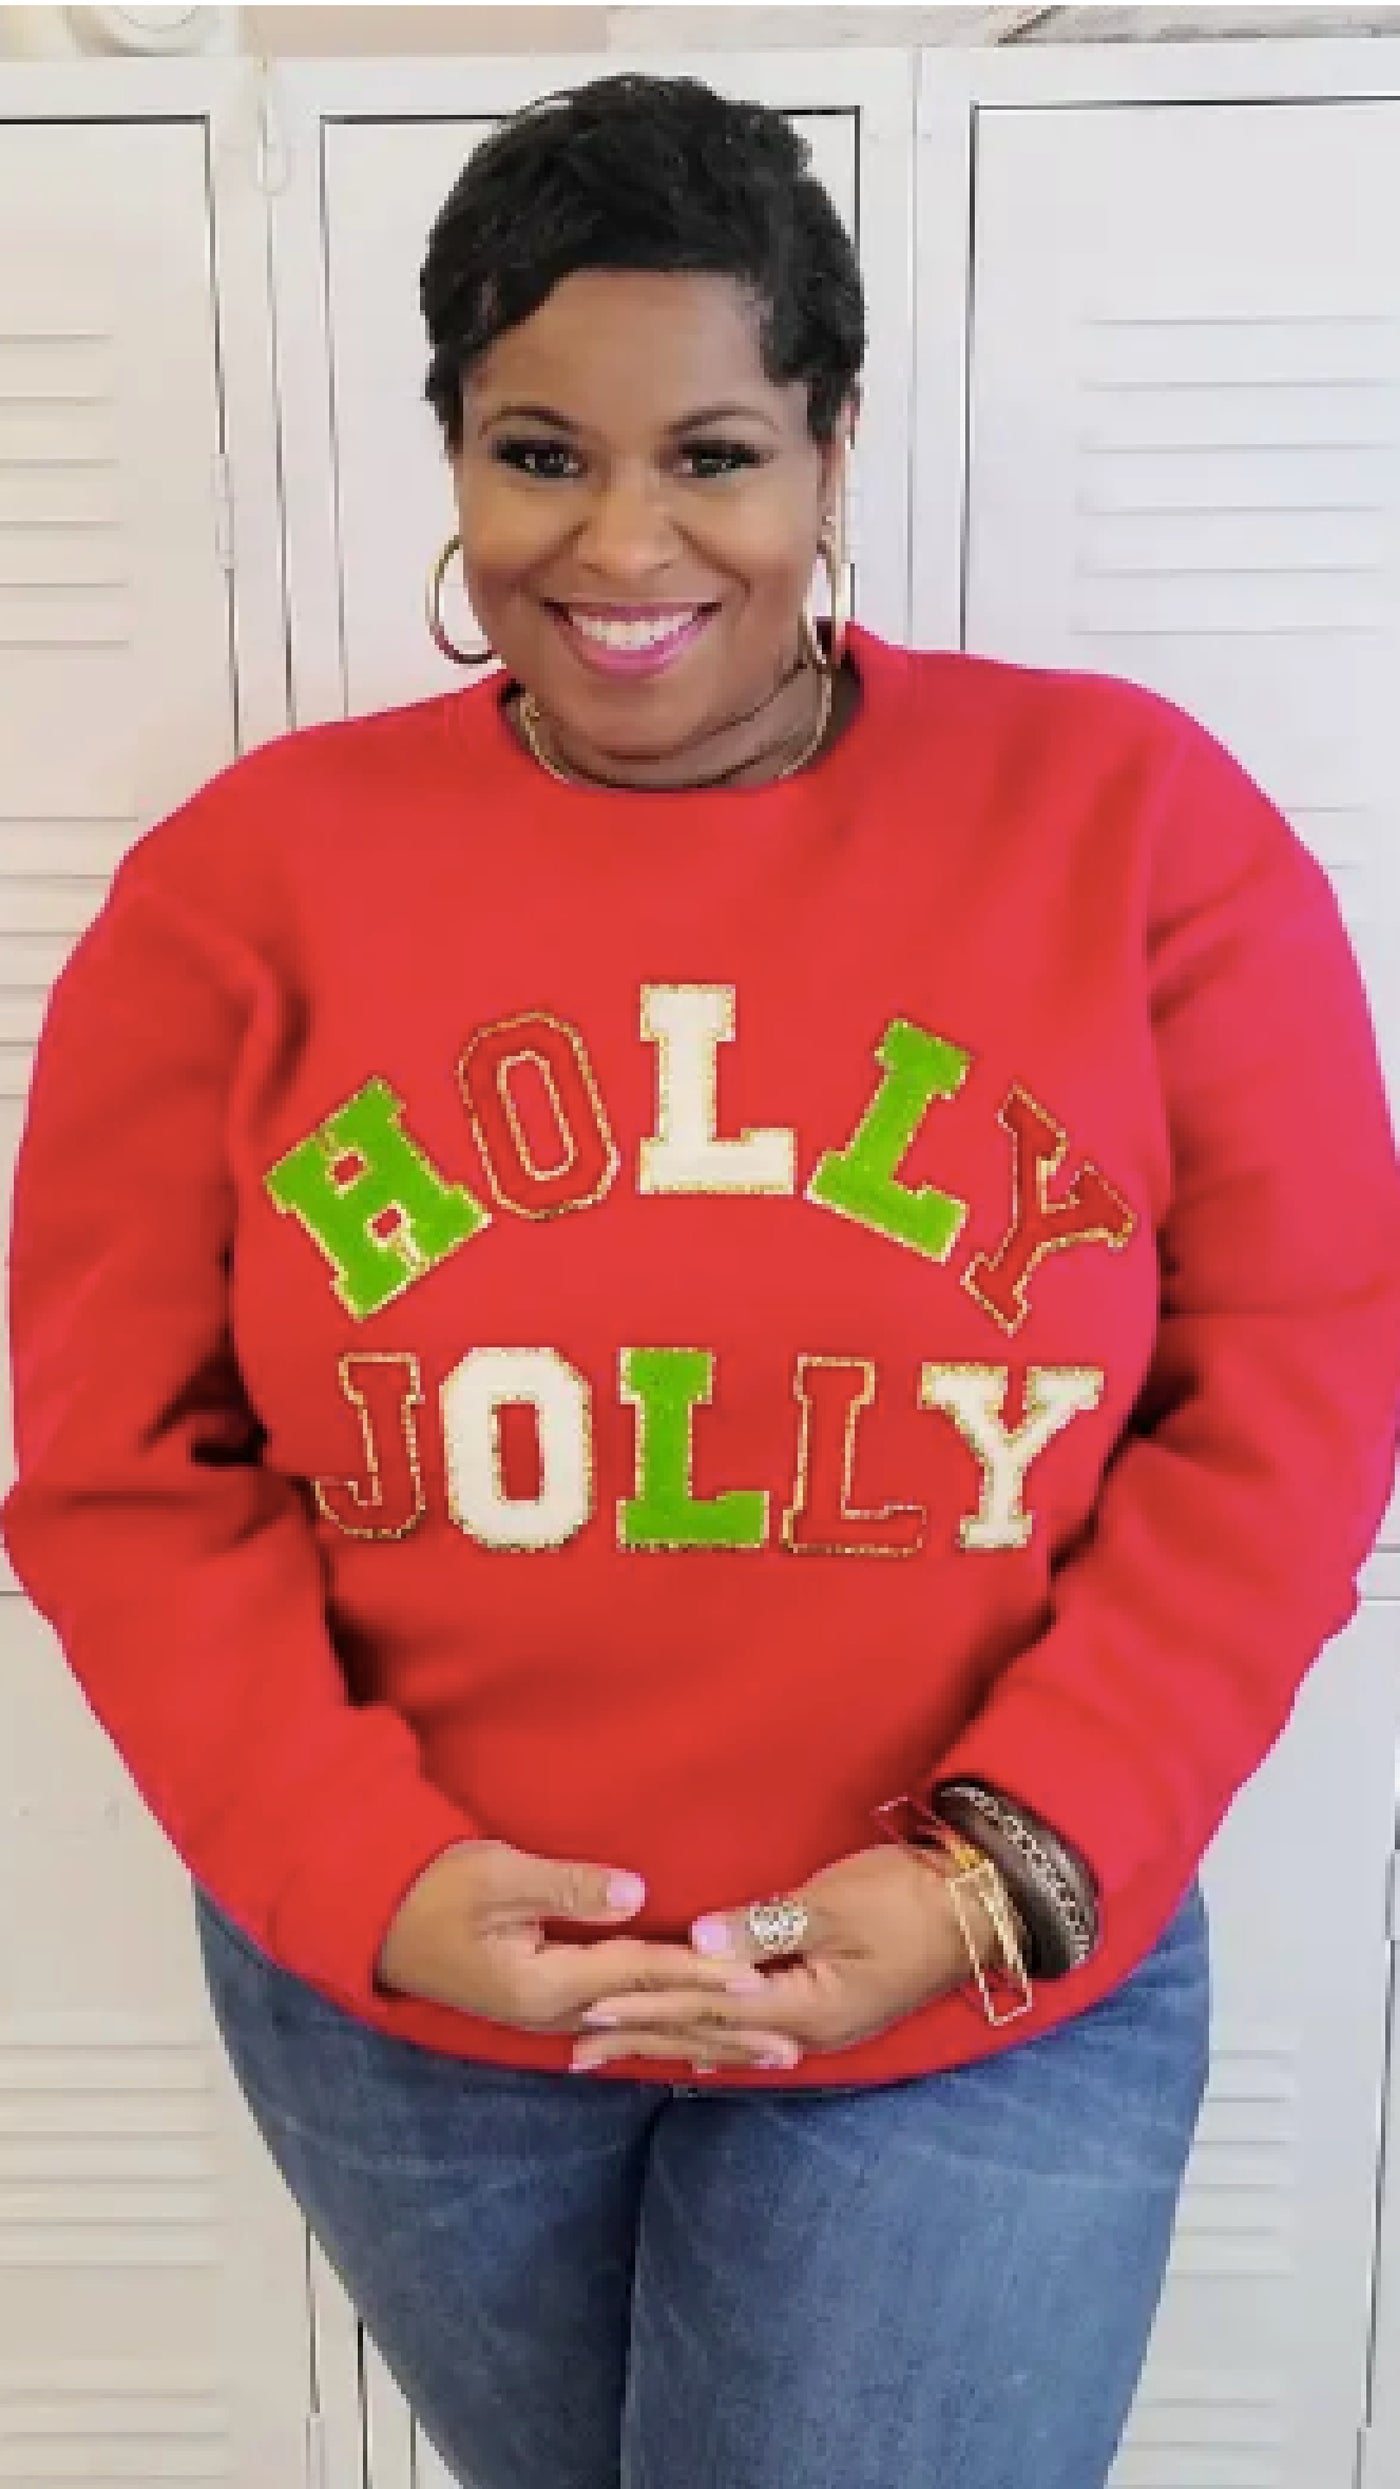 Holly Jolly Top - Piper and Hollow Boutique